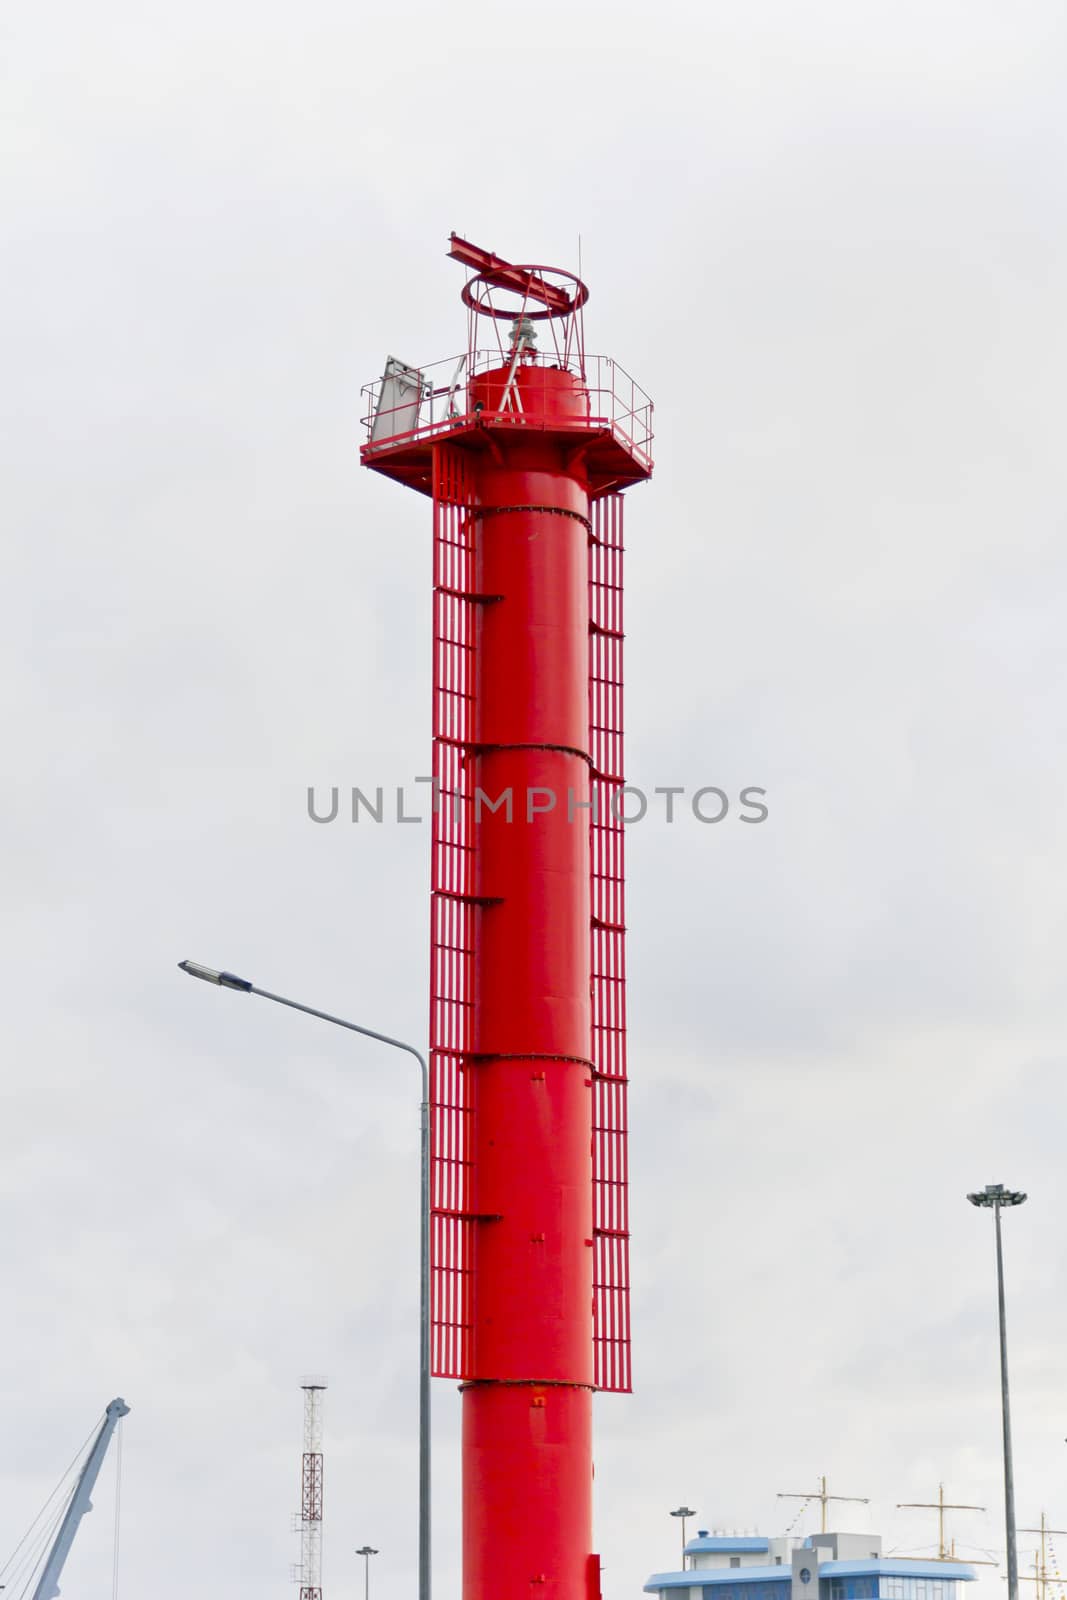 Vertical photo of the high red lighthouse in sea port